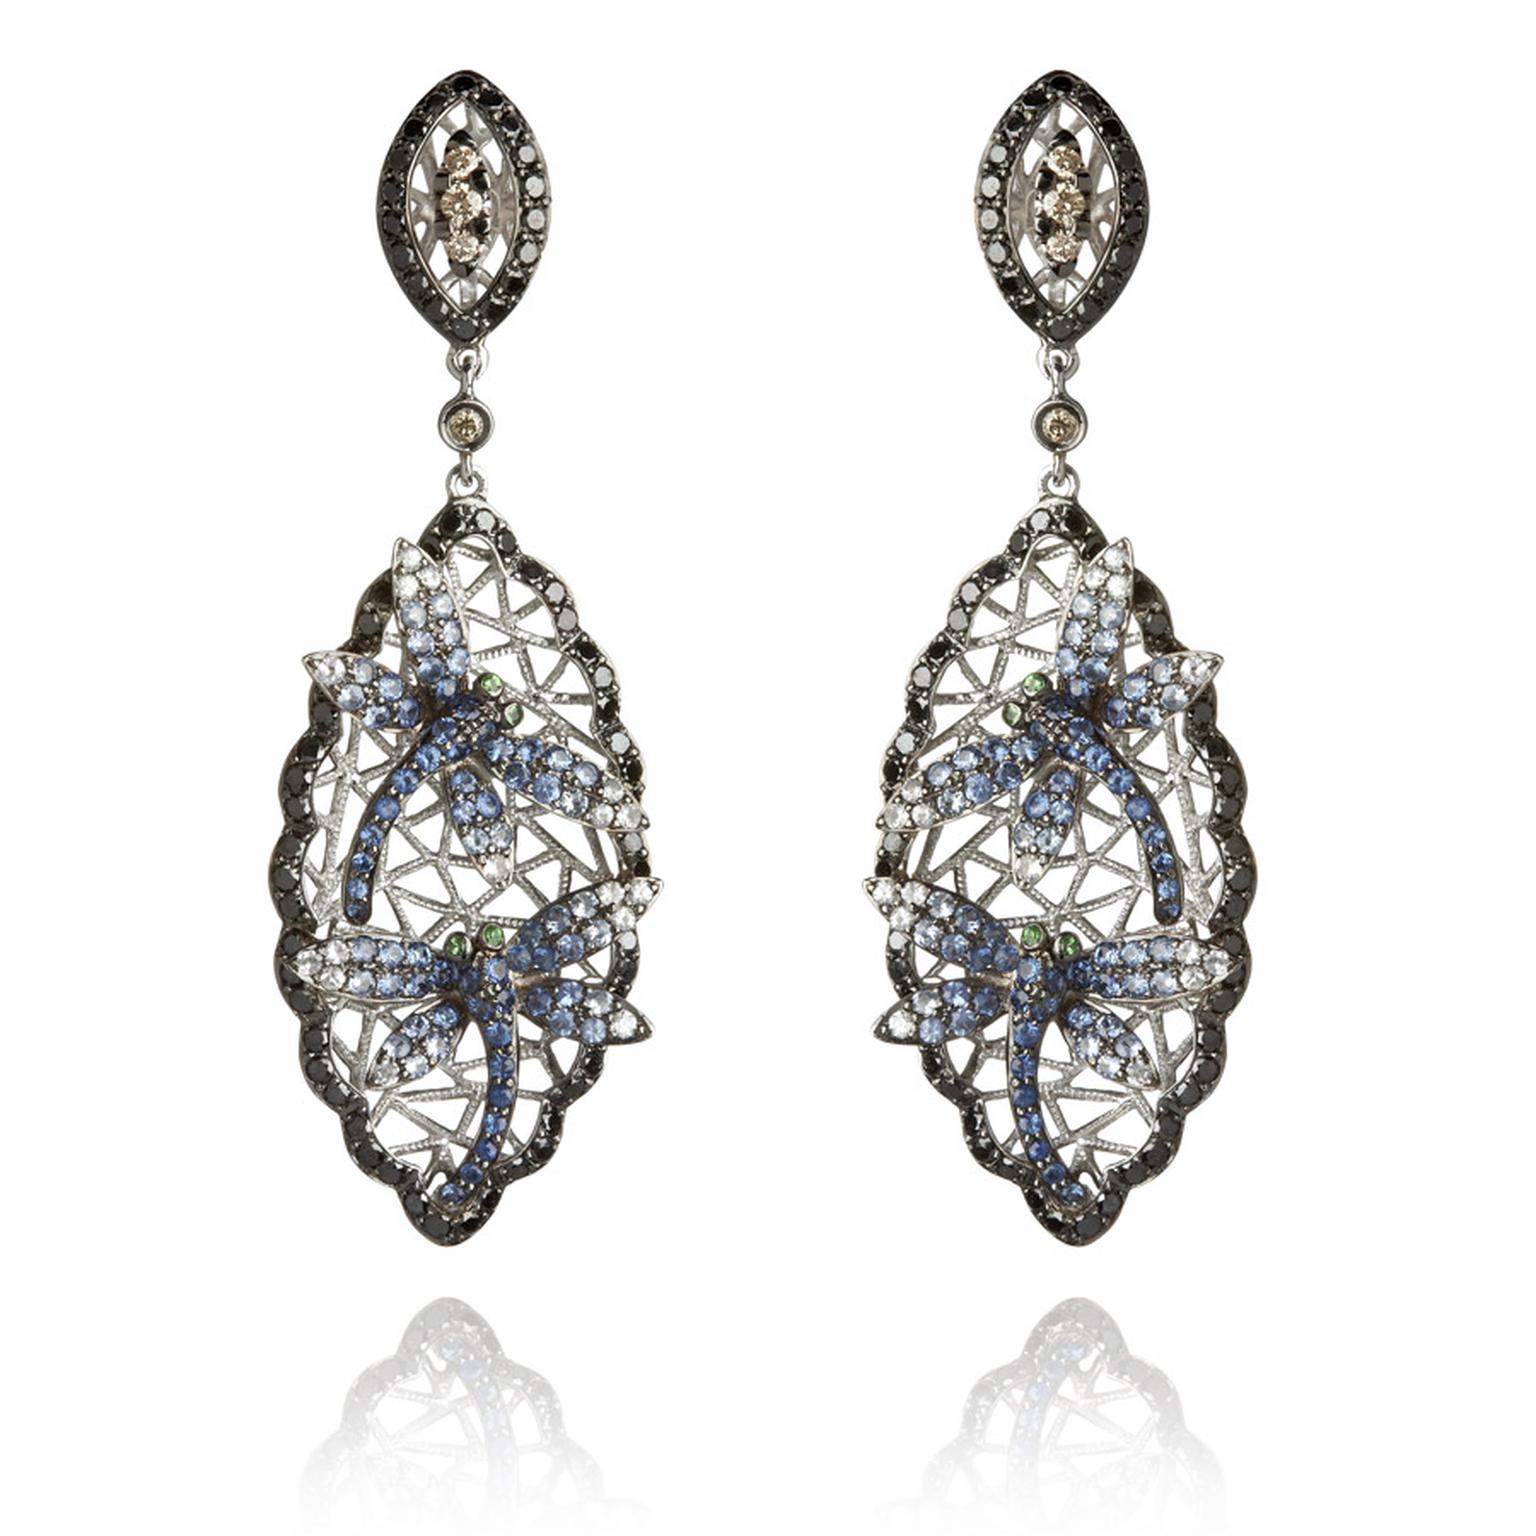 Wendy-Yue-Fantasie-18ct-white-gold--diamond-sapphire-and-garnet-Diving-Dragonfly-earrings-By-Wendy-Yue-for--Annoushka.jpg